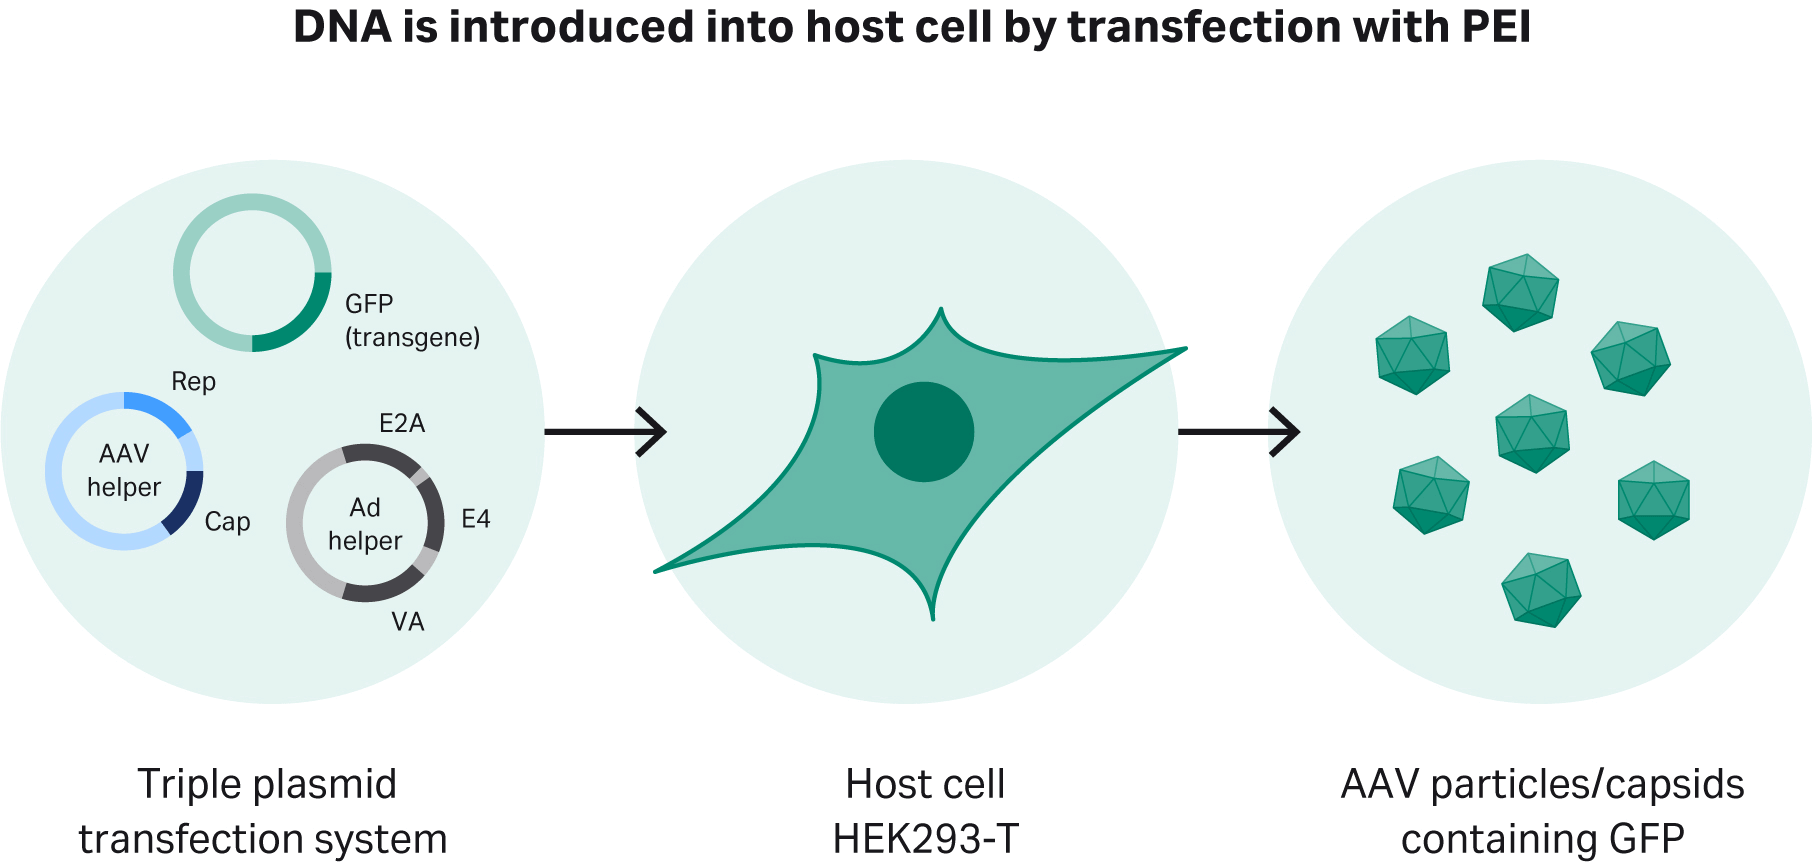 Transient transfection of adapted HEK293T cells using a triple plasmid transfection approach.